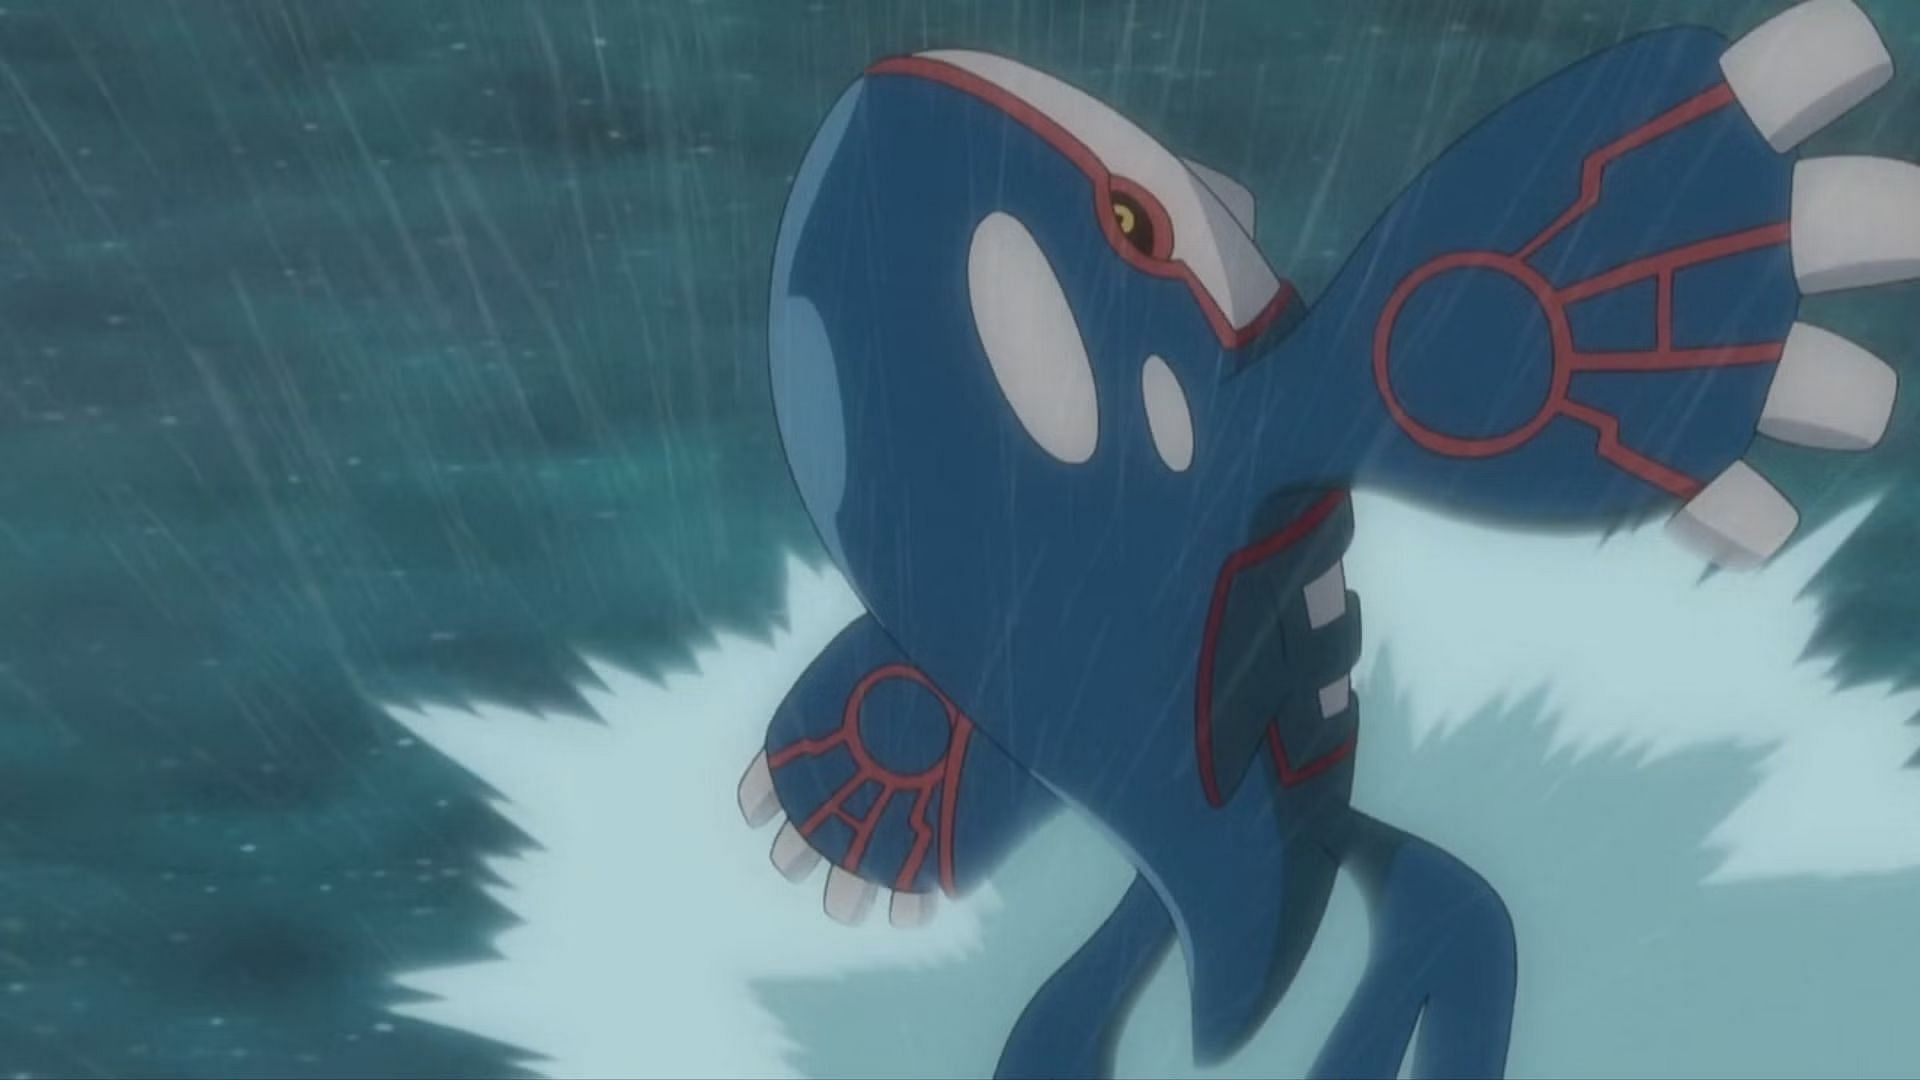 Kyogre as seen in the anime